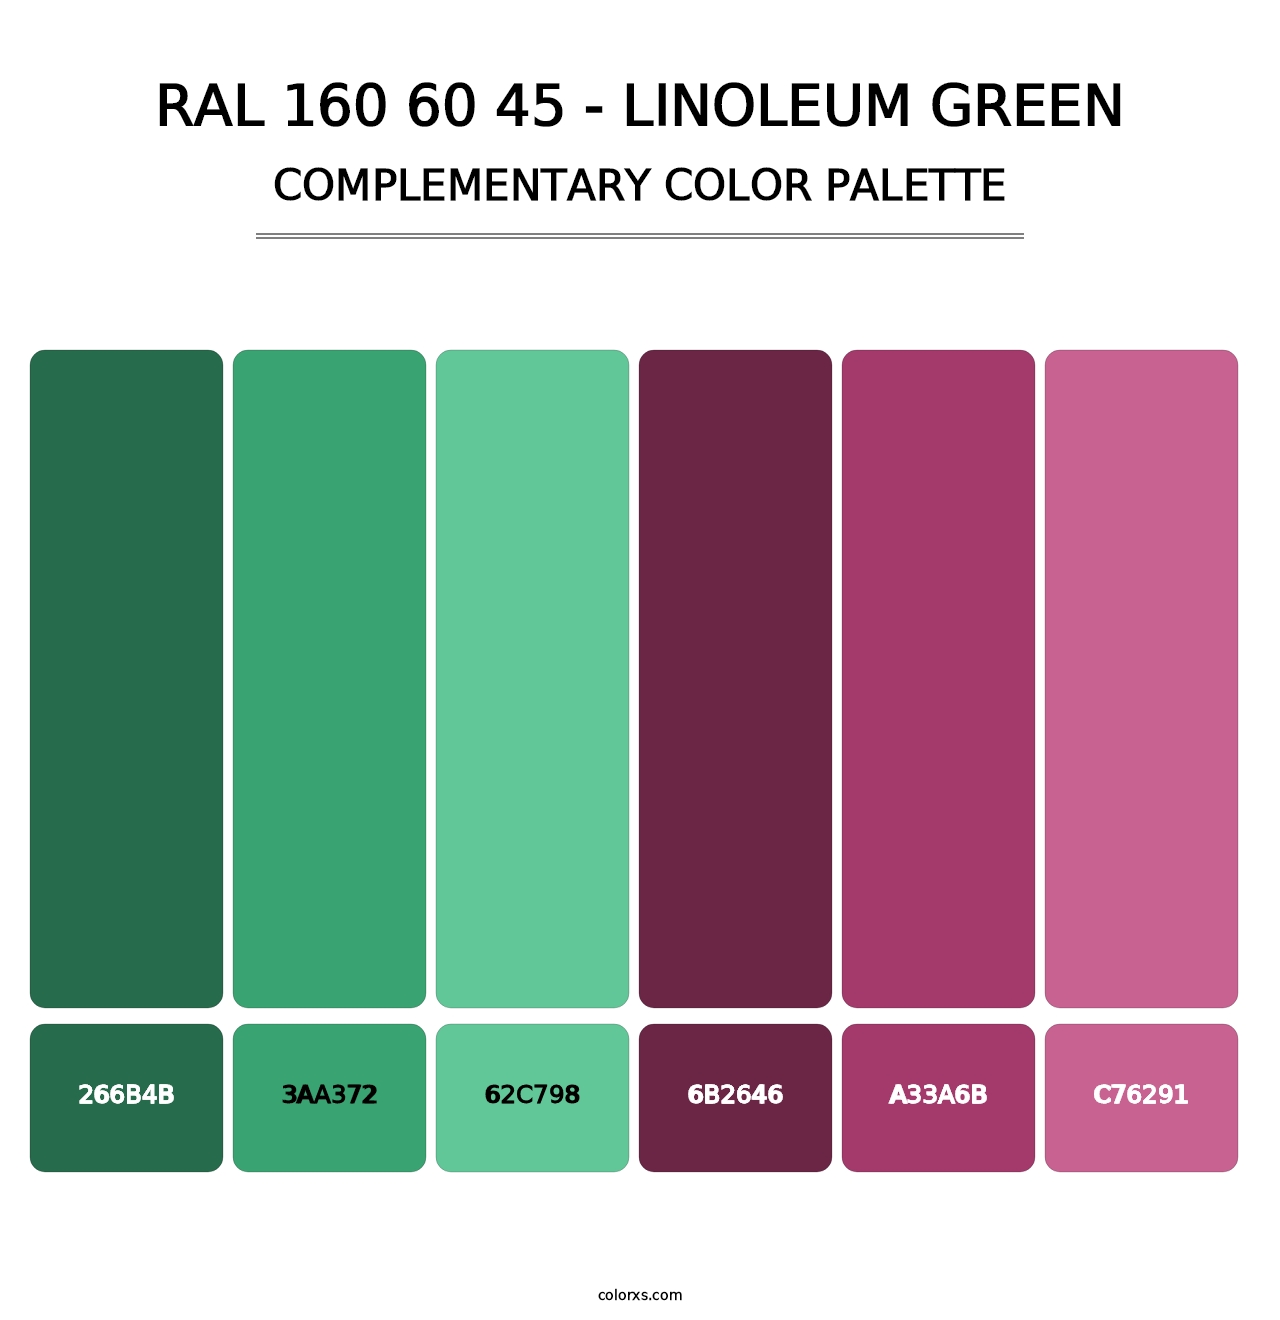 RAL 160 60 45 - Linoleum Green - Complementary Color Palette